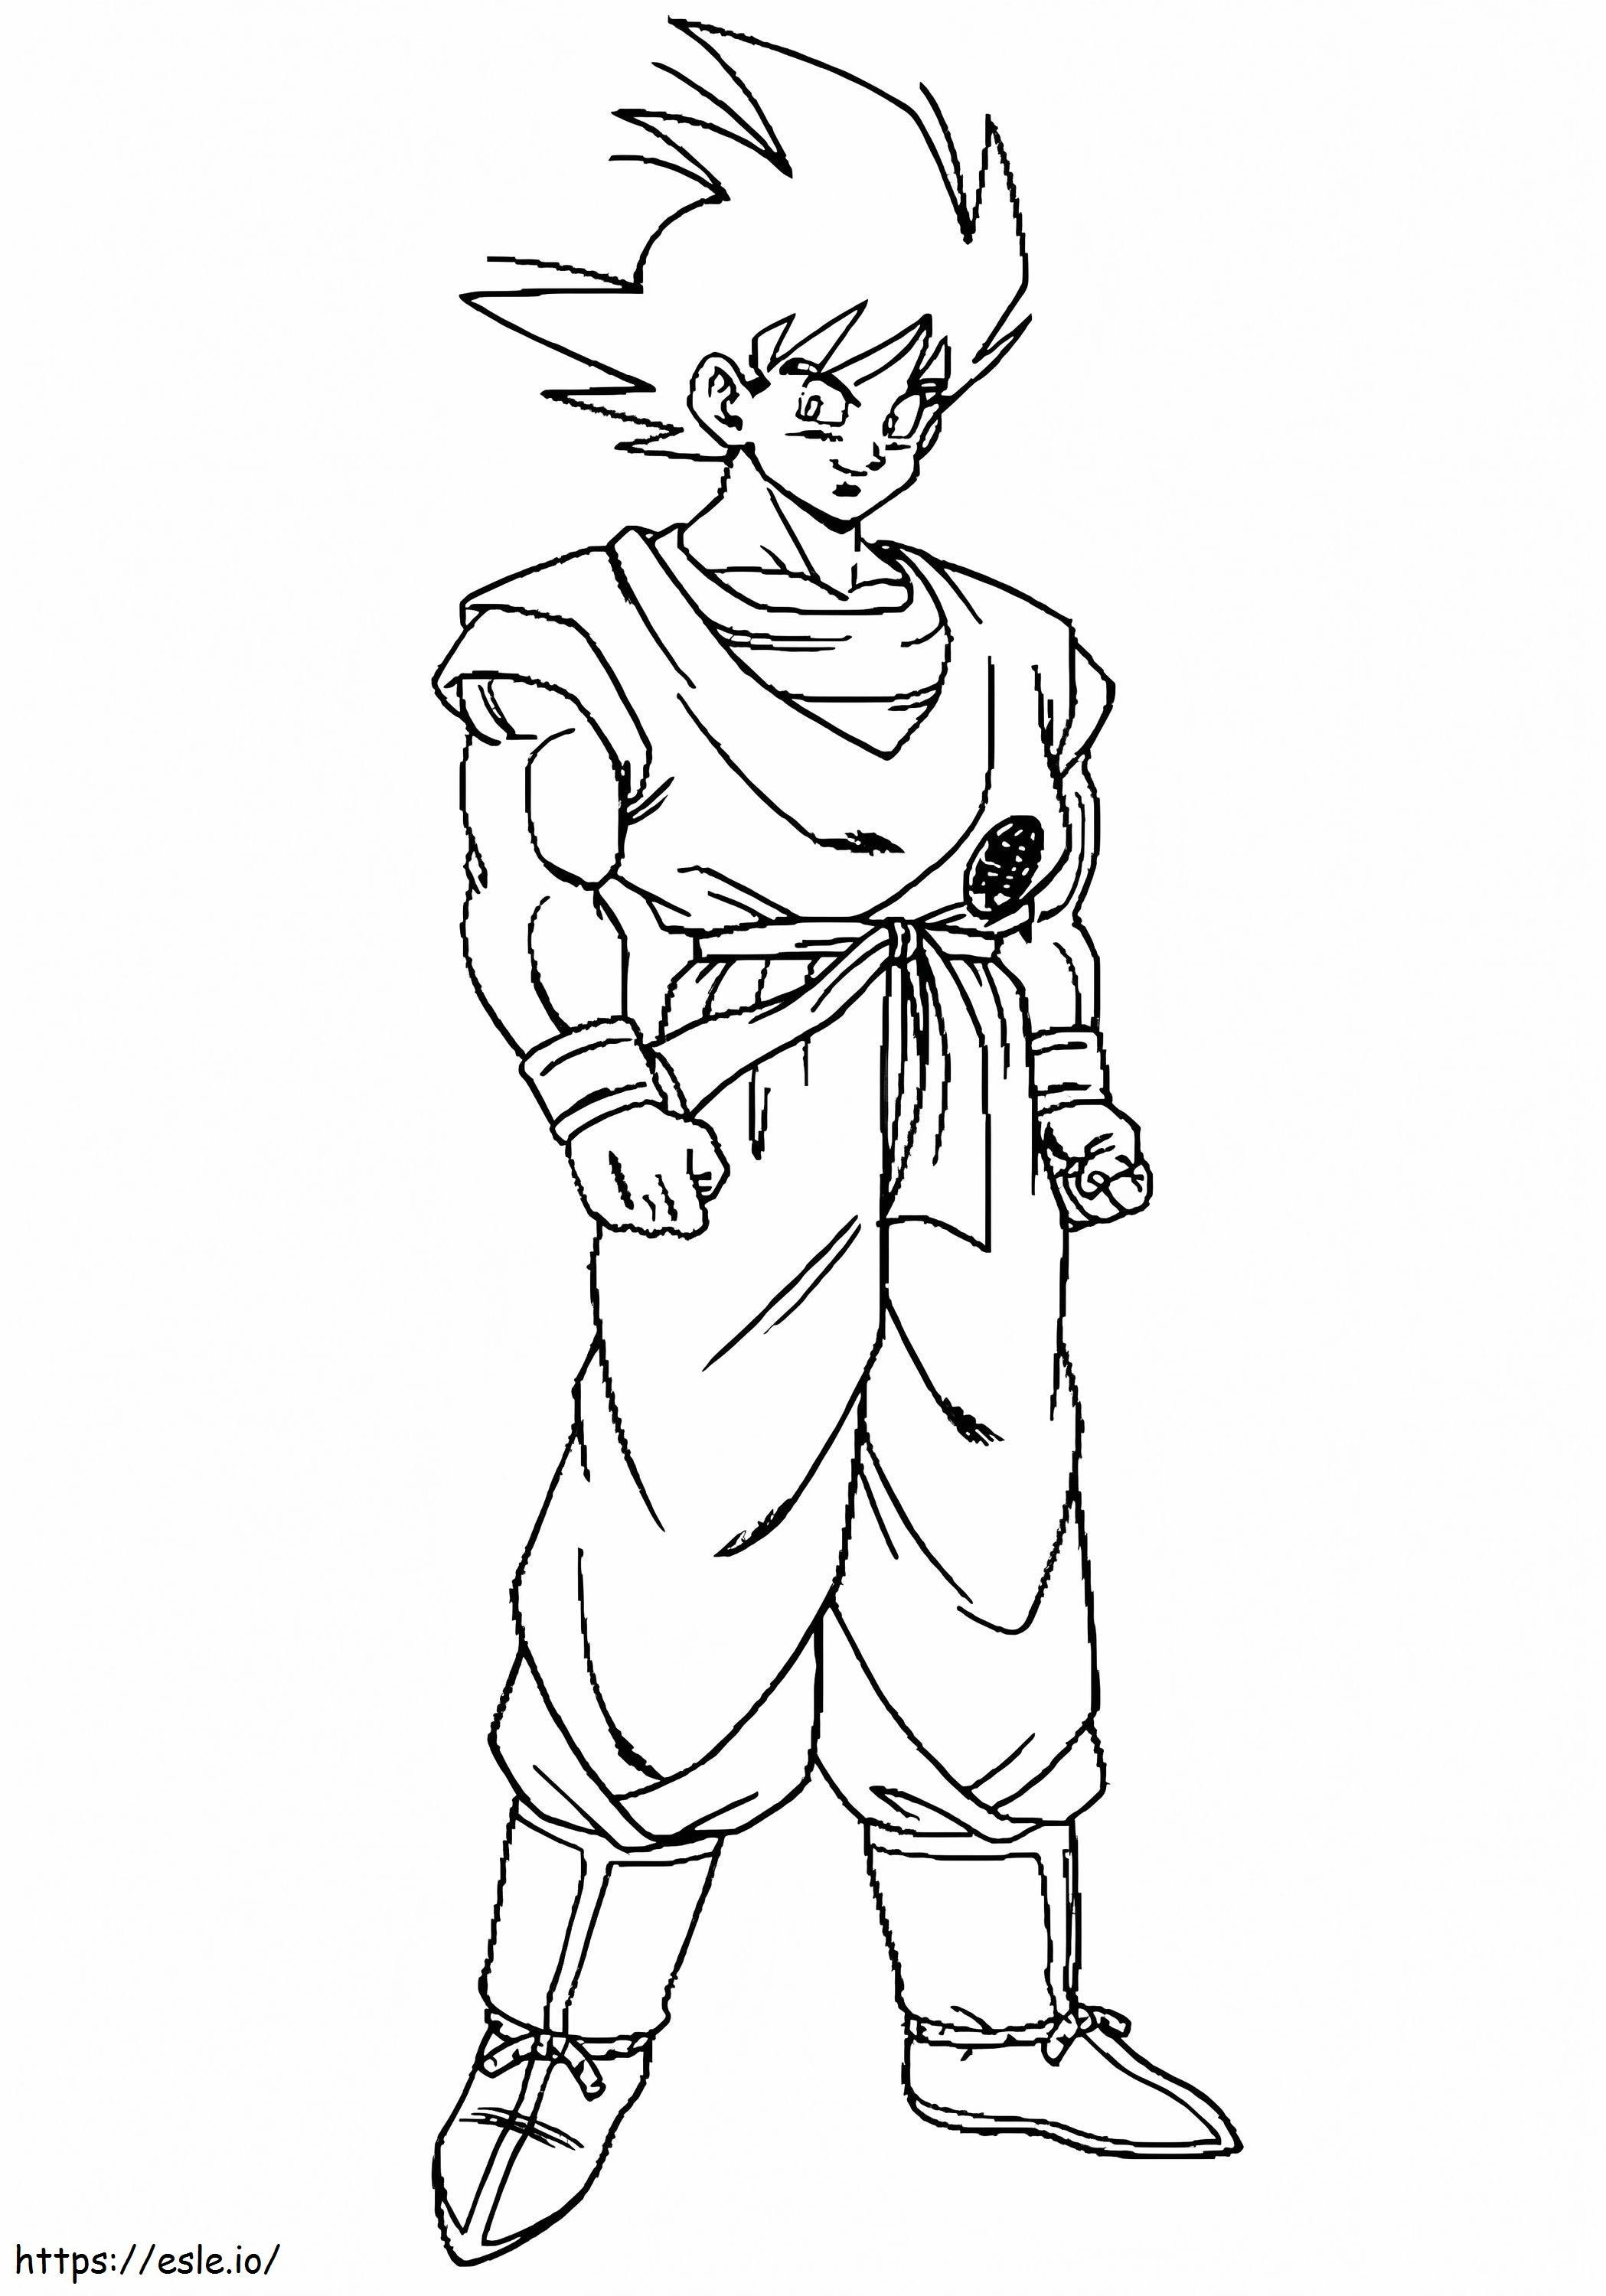 Son Goku Is Smiling coloring page